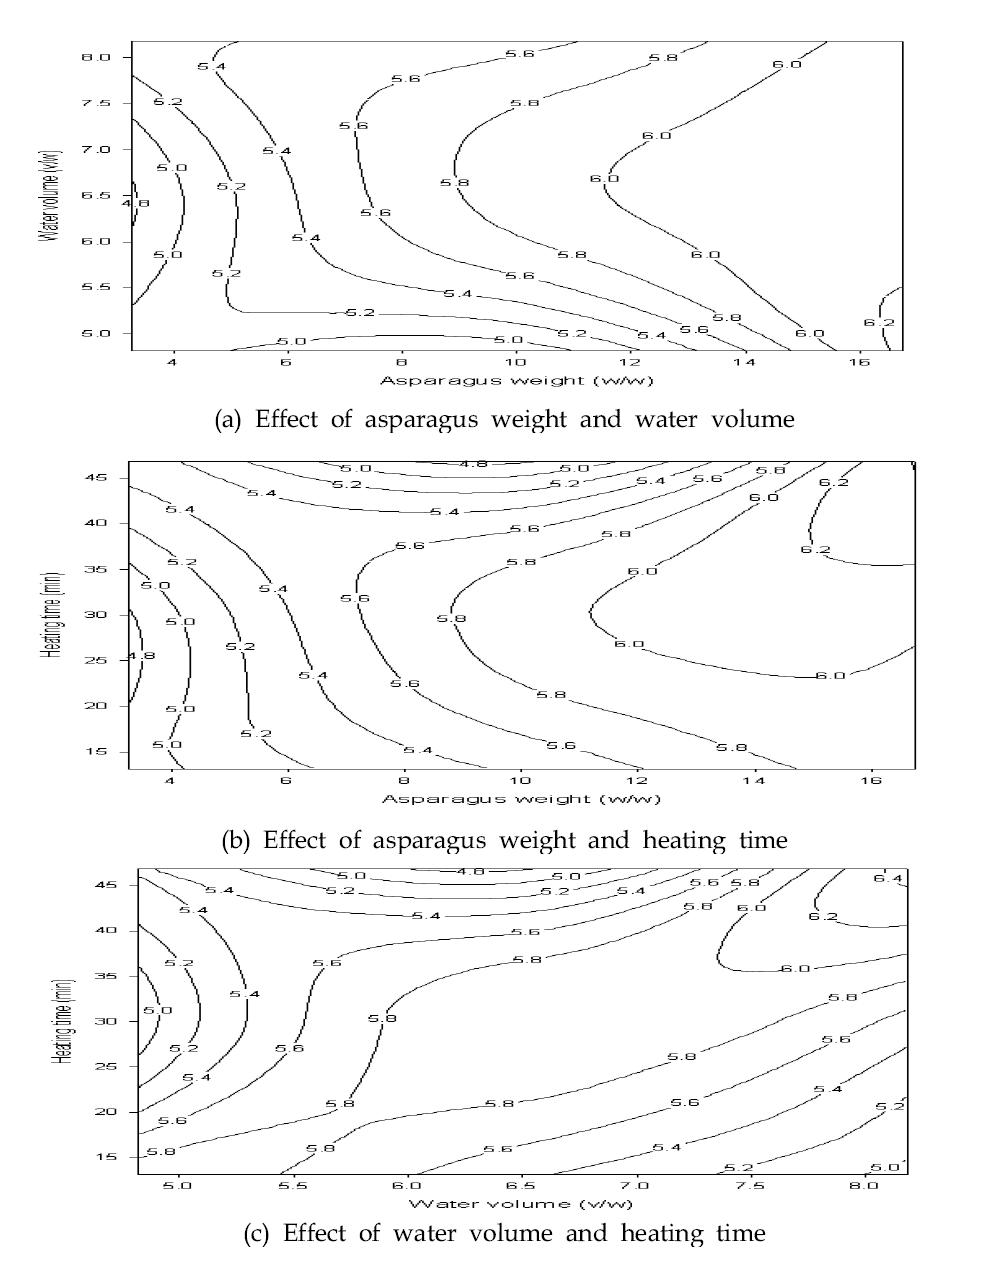 Contour plots of flavor in manufacturing asparagus porridge. (a) Effect of asparagus weight and water volume (b) Effect of asparagus weight and heating time (c) Effect of water volume and heating time.